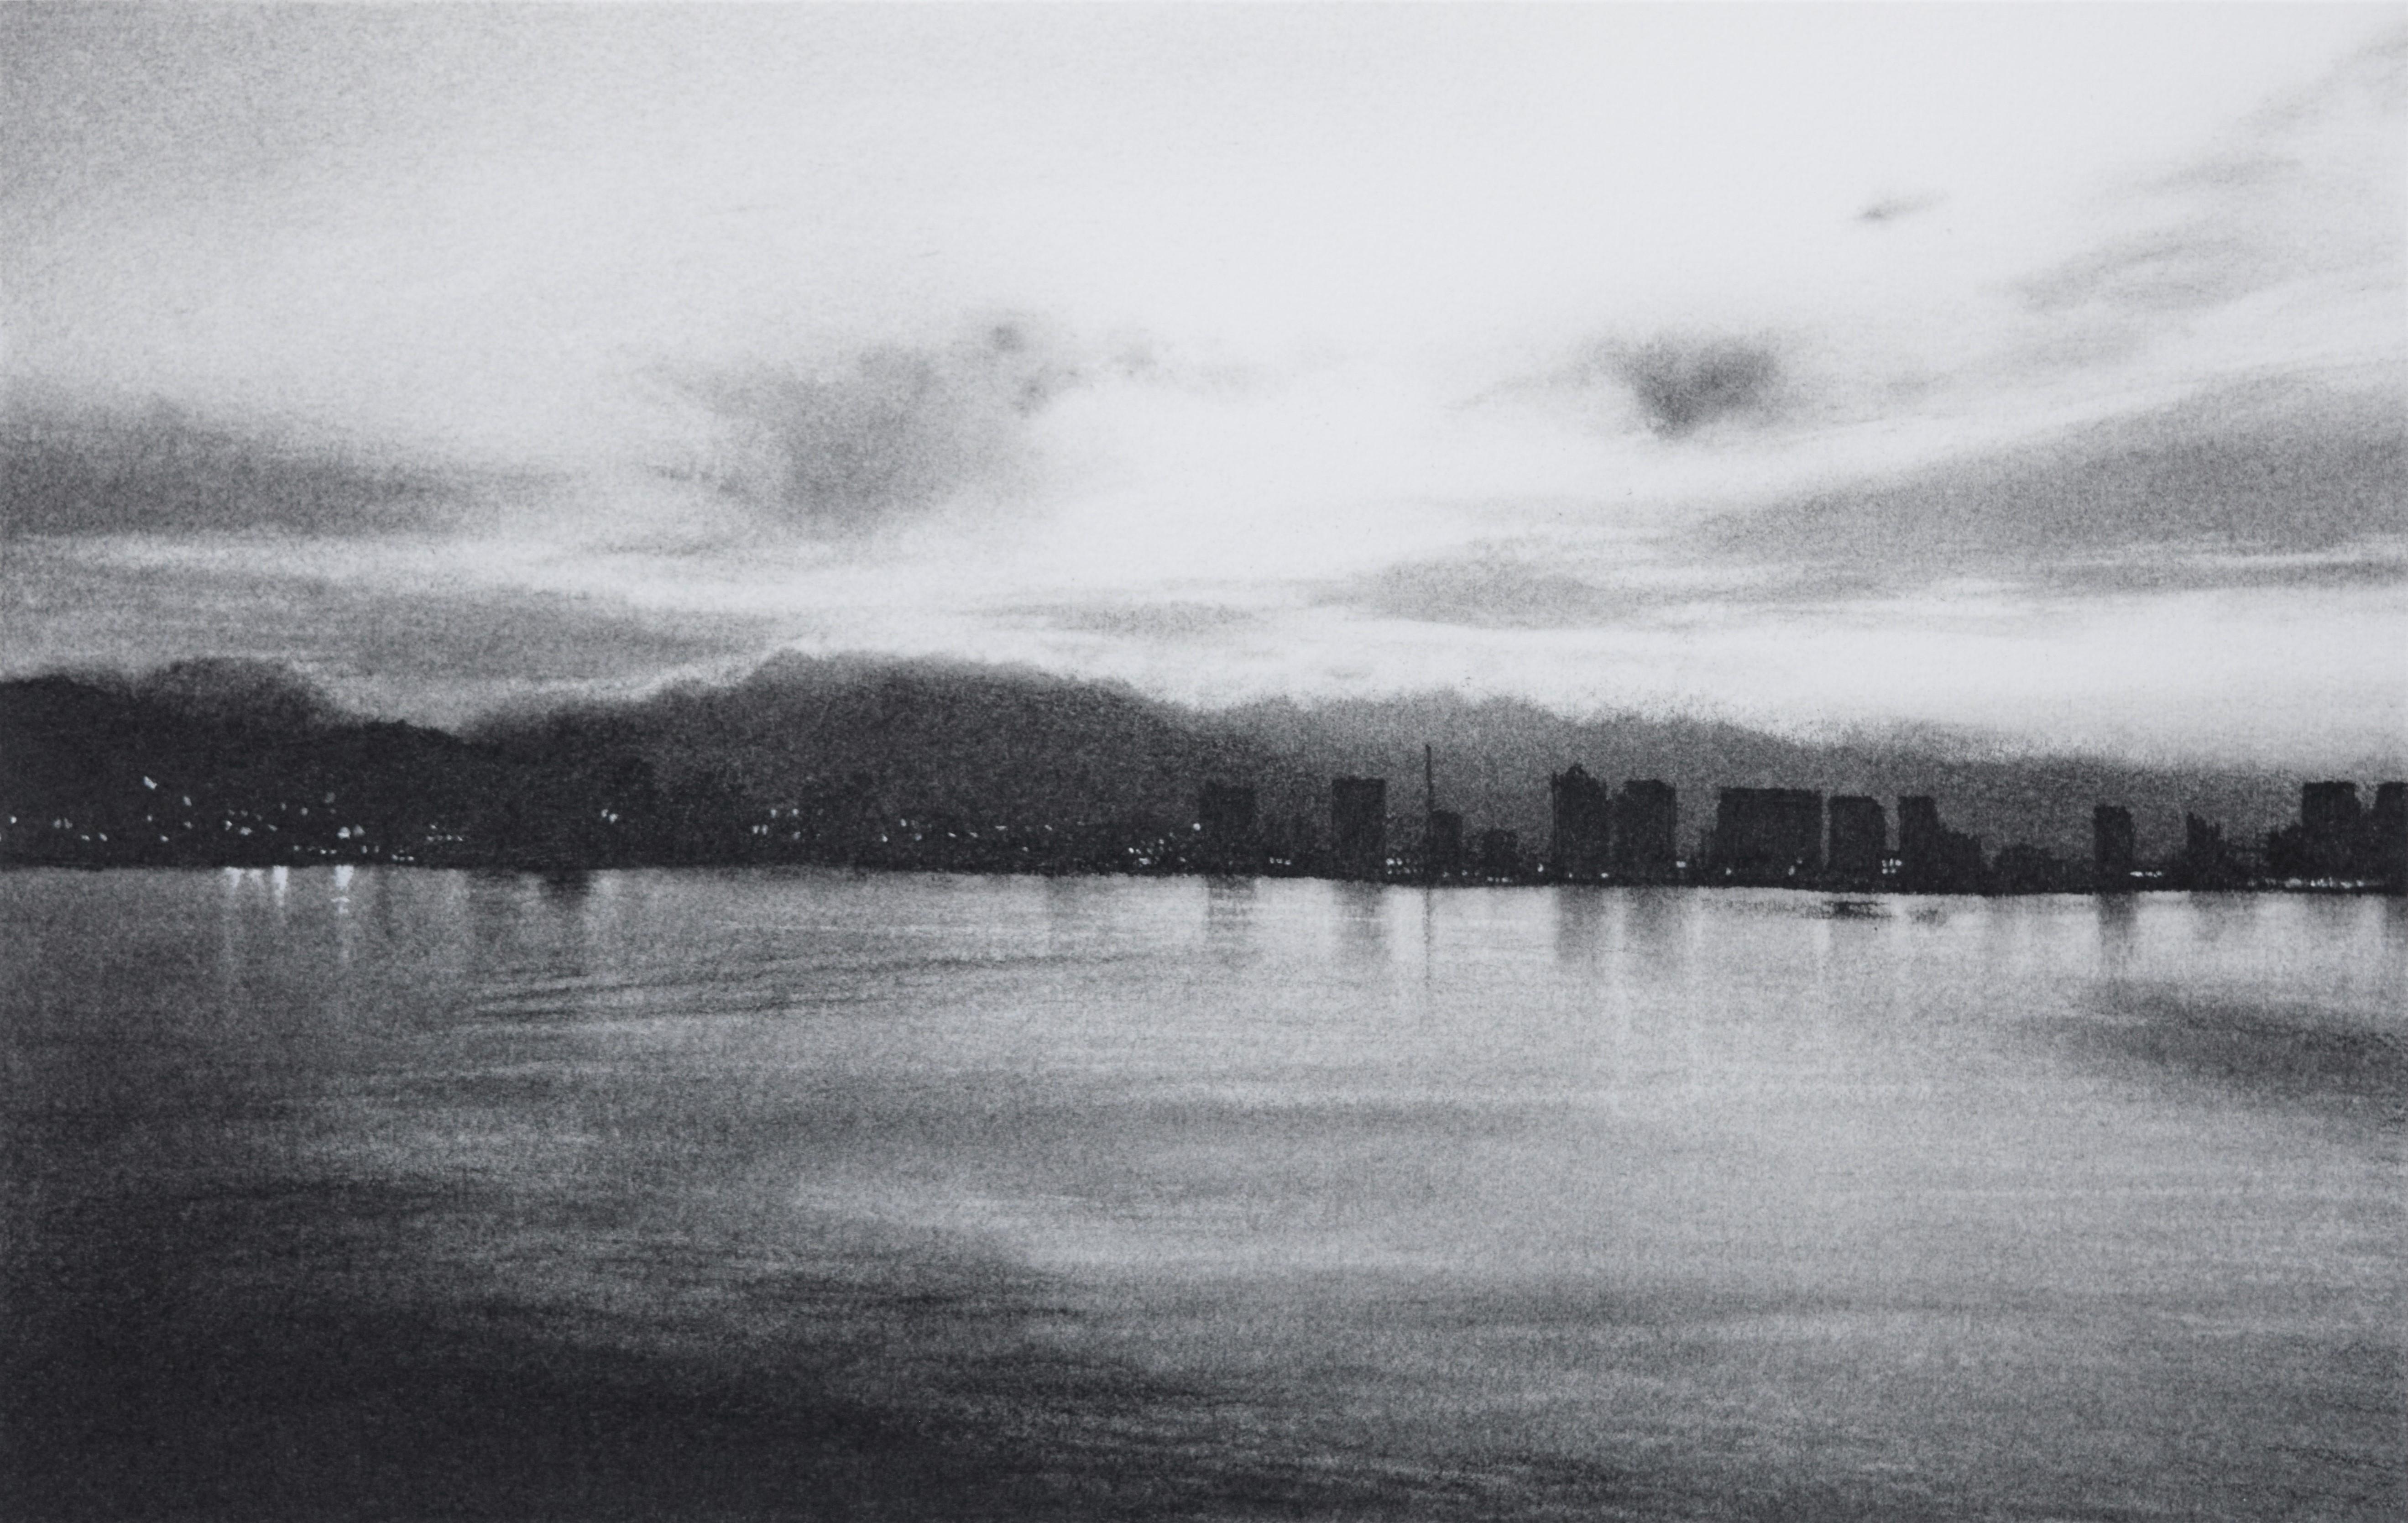 Irrepressible 13, black and white charcoal drawing of lake scene with city